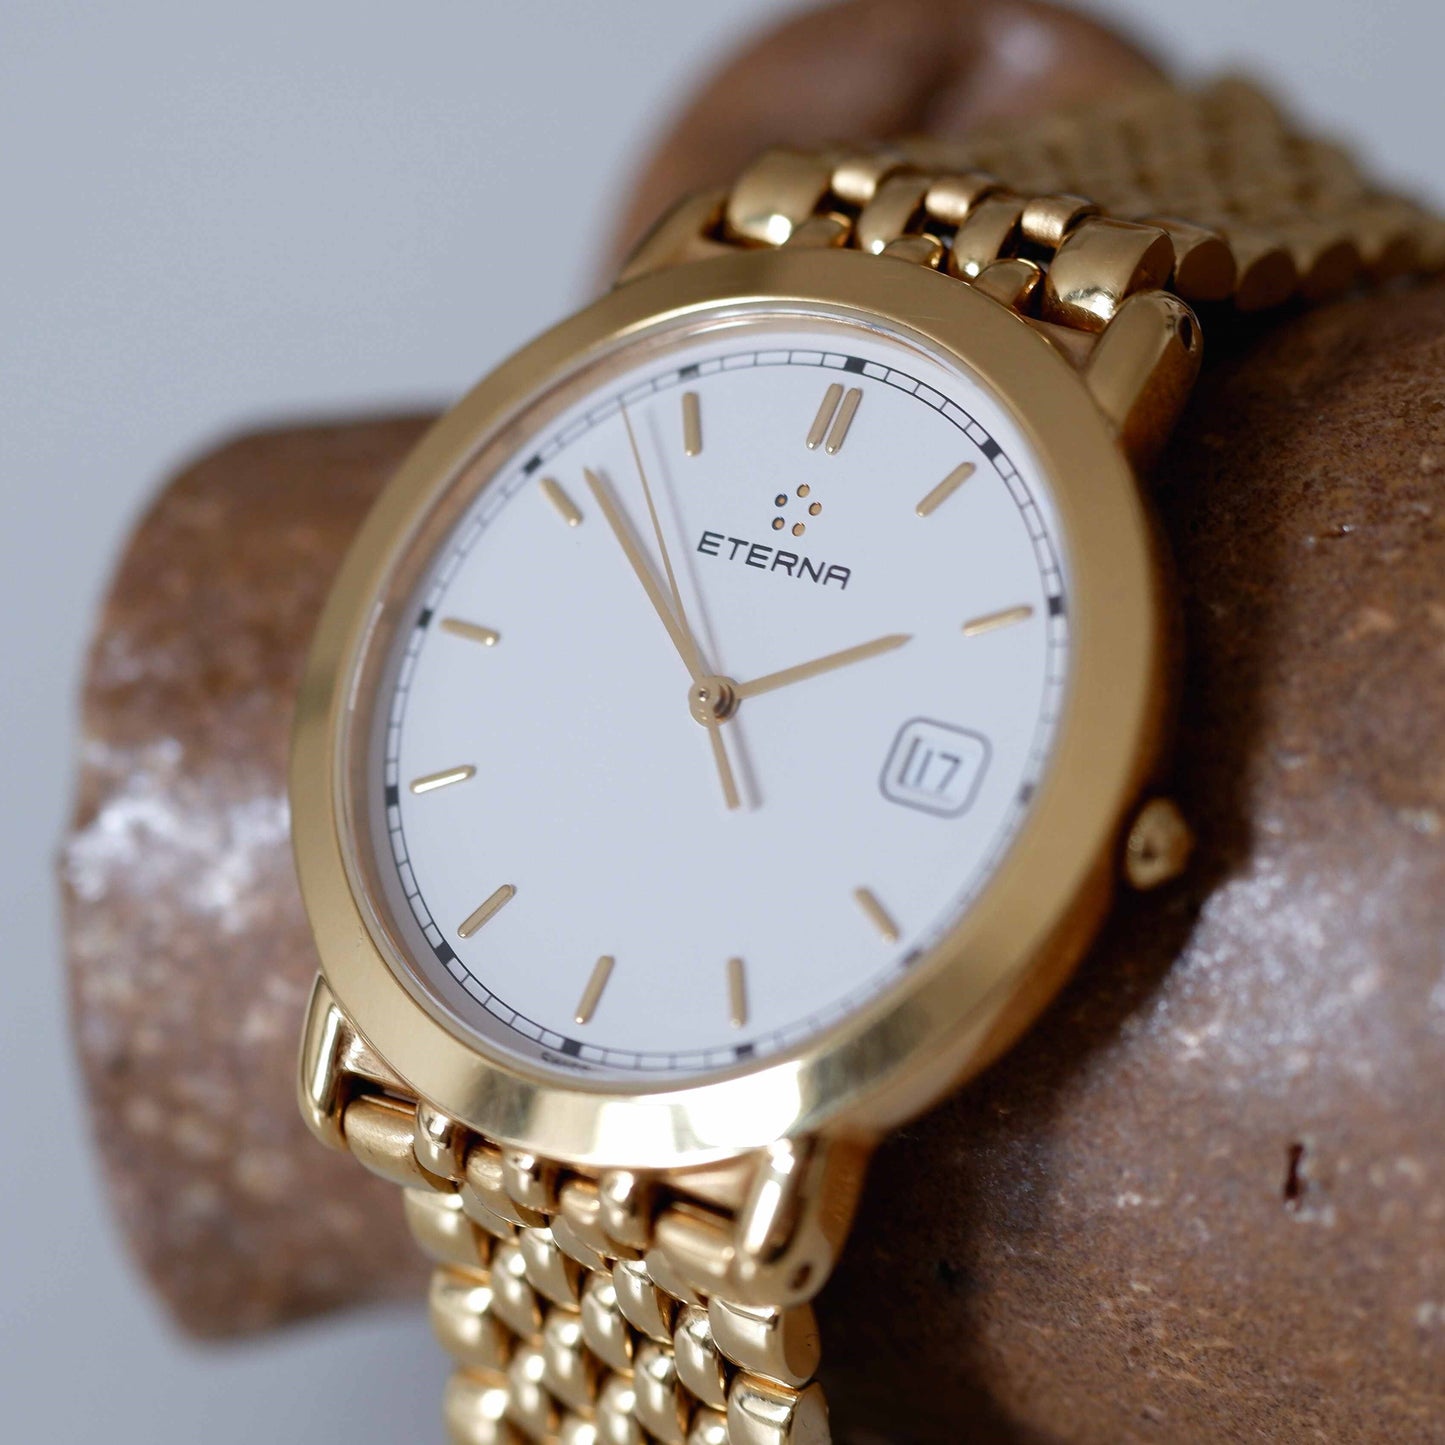 Eterna Vintage Ladies Watch: 90s Golden Iconic with White Dial | Slight Right Side